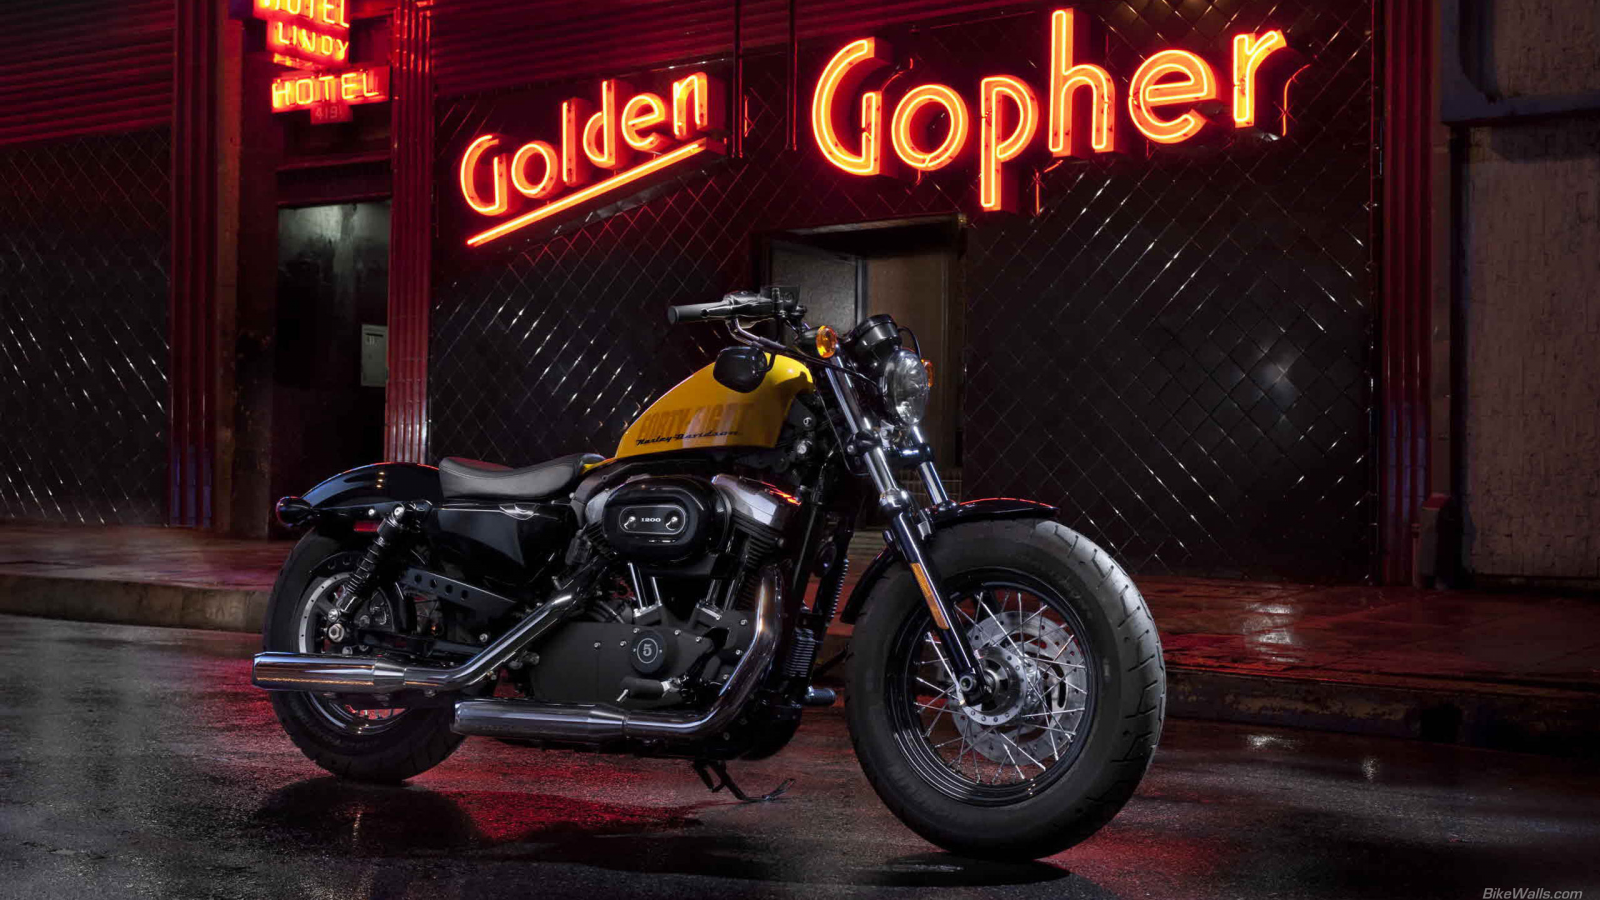 XL 1200 X Sportster Forty-Eight 2012, Sportster, мотоциклы, Harley-Davidson, мото, XL 1200 X Sportster Forty-Eight, motorcycle, moto, motorbike